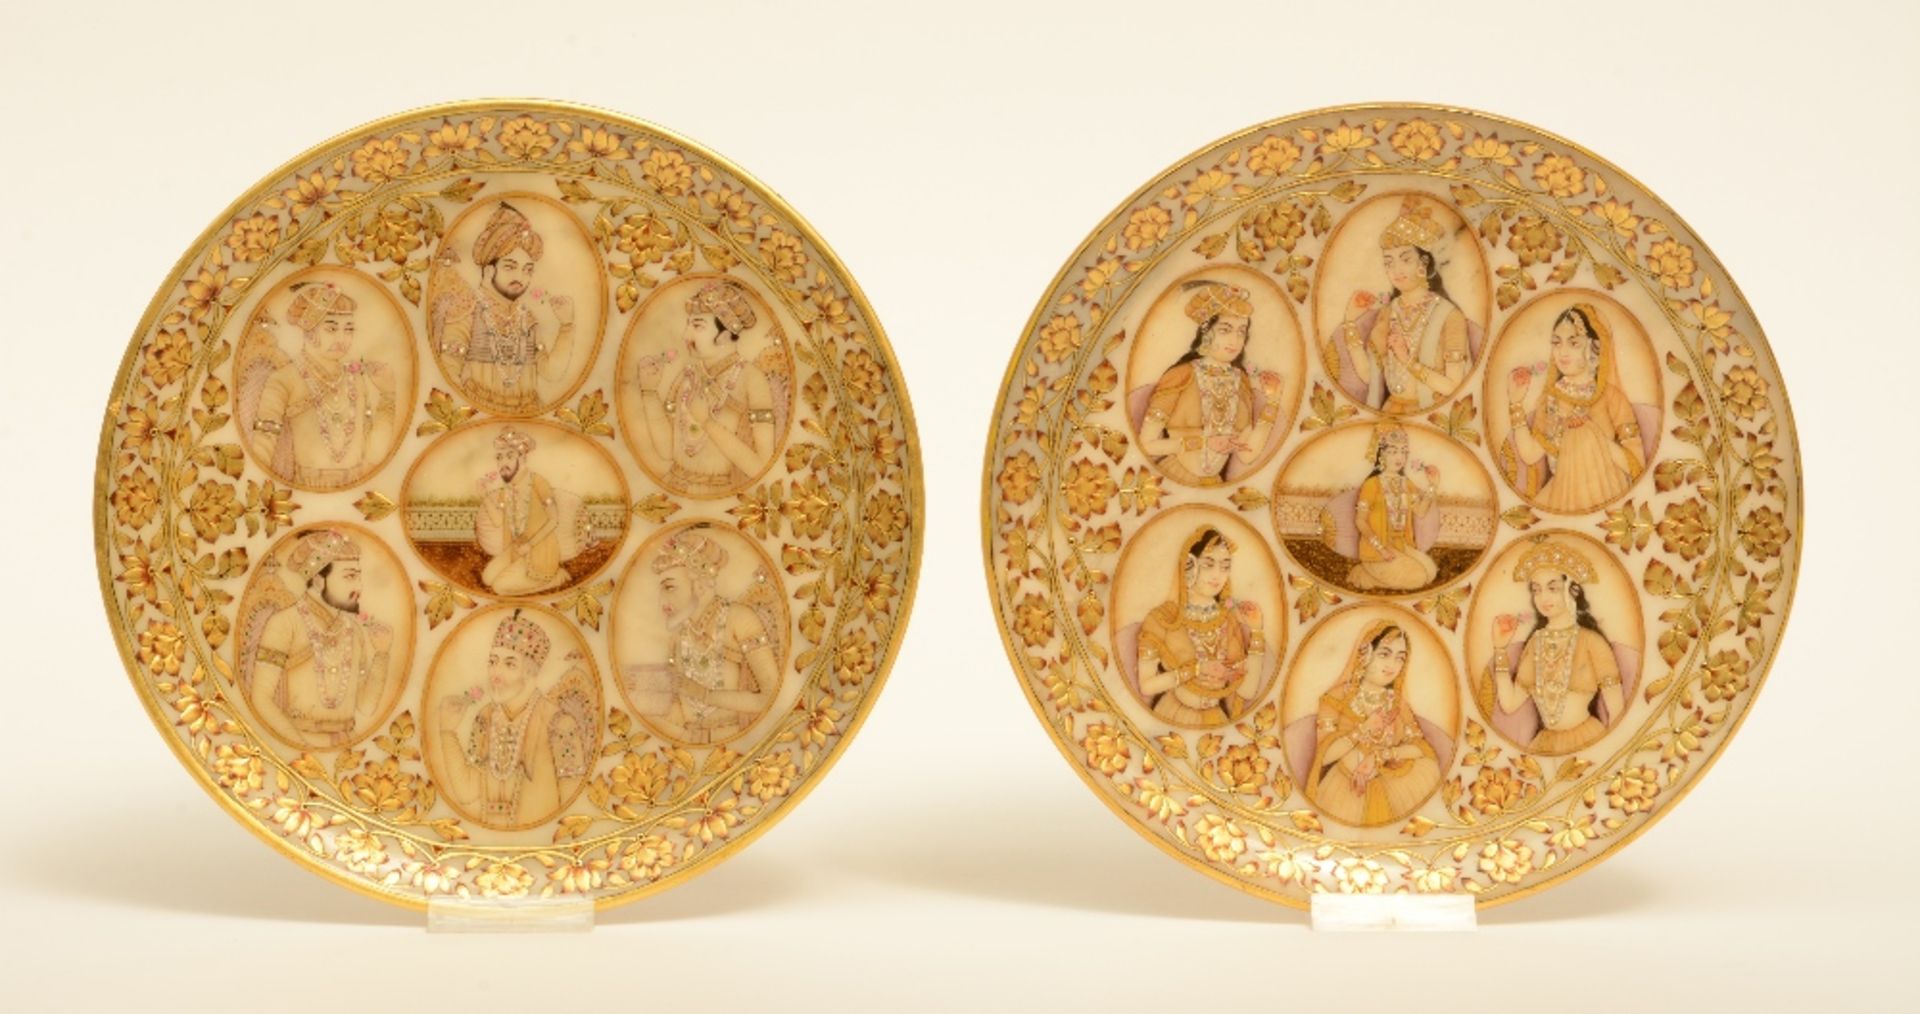 A rare pair of Moghul alabaster plaques, decorated with various portraits, each plaque surrounded by